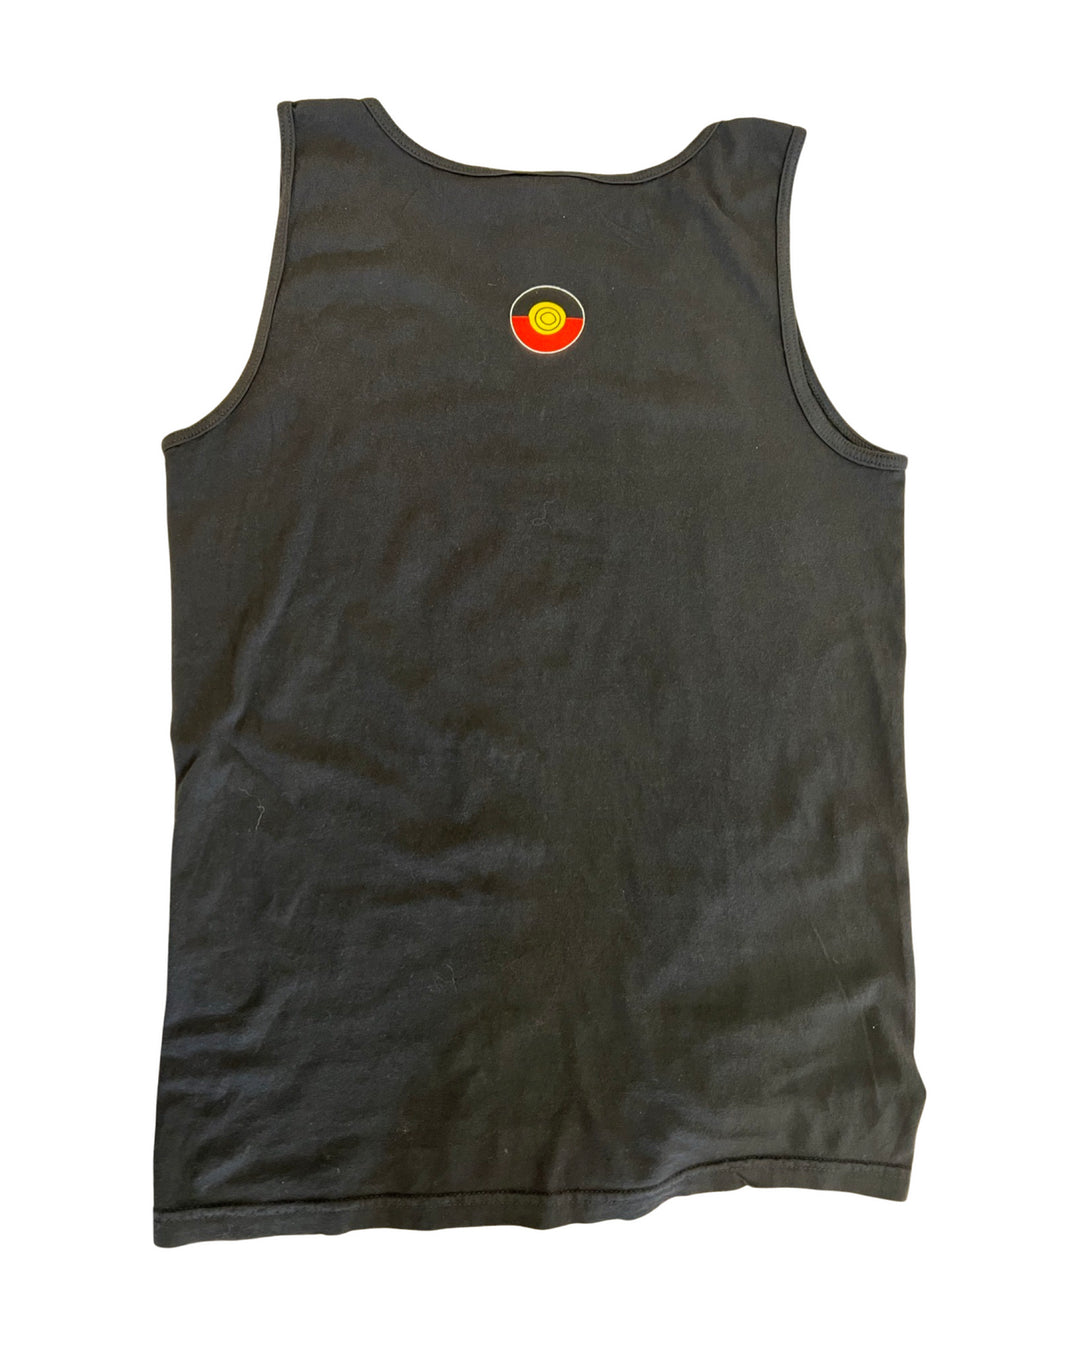 Clothing The Gaps. Chillin' 'Always Was, Always Will Be' Singlet. Vintage washed black singlet with Black, yellow and red 'always was always will be' text screen printed in centre.